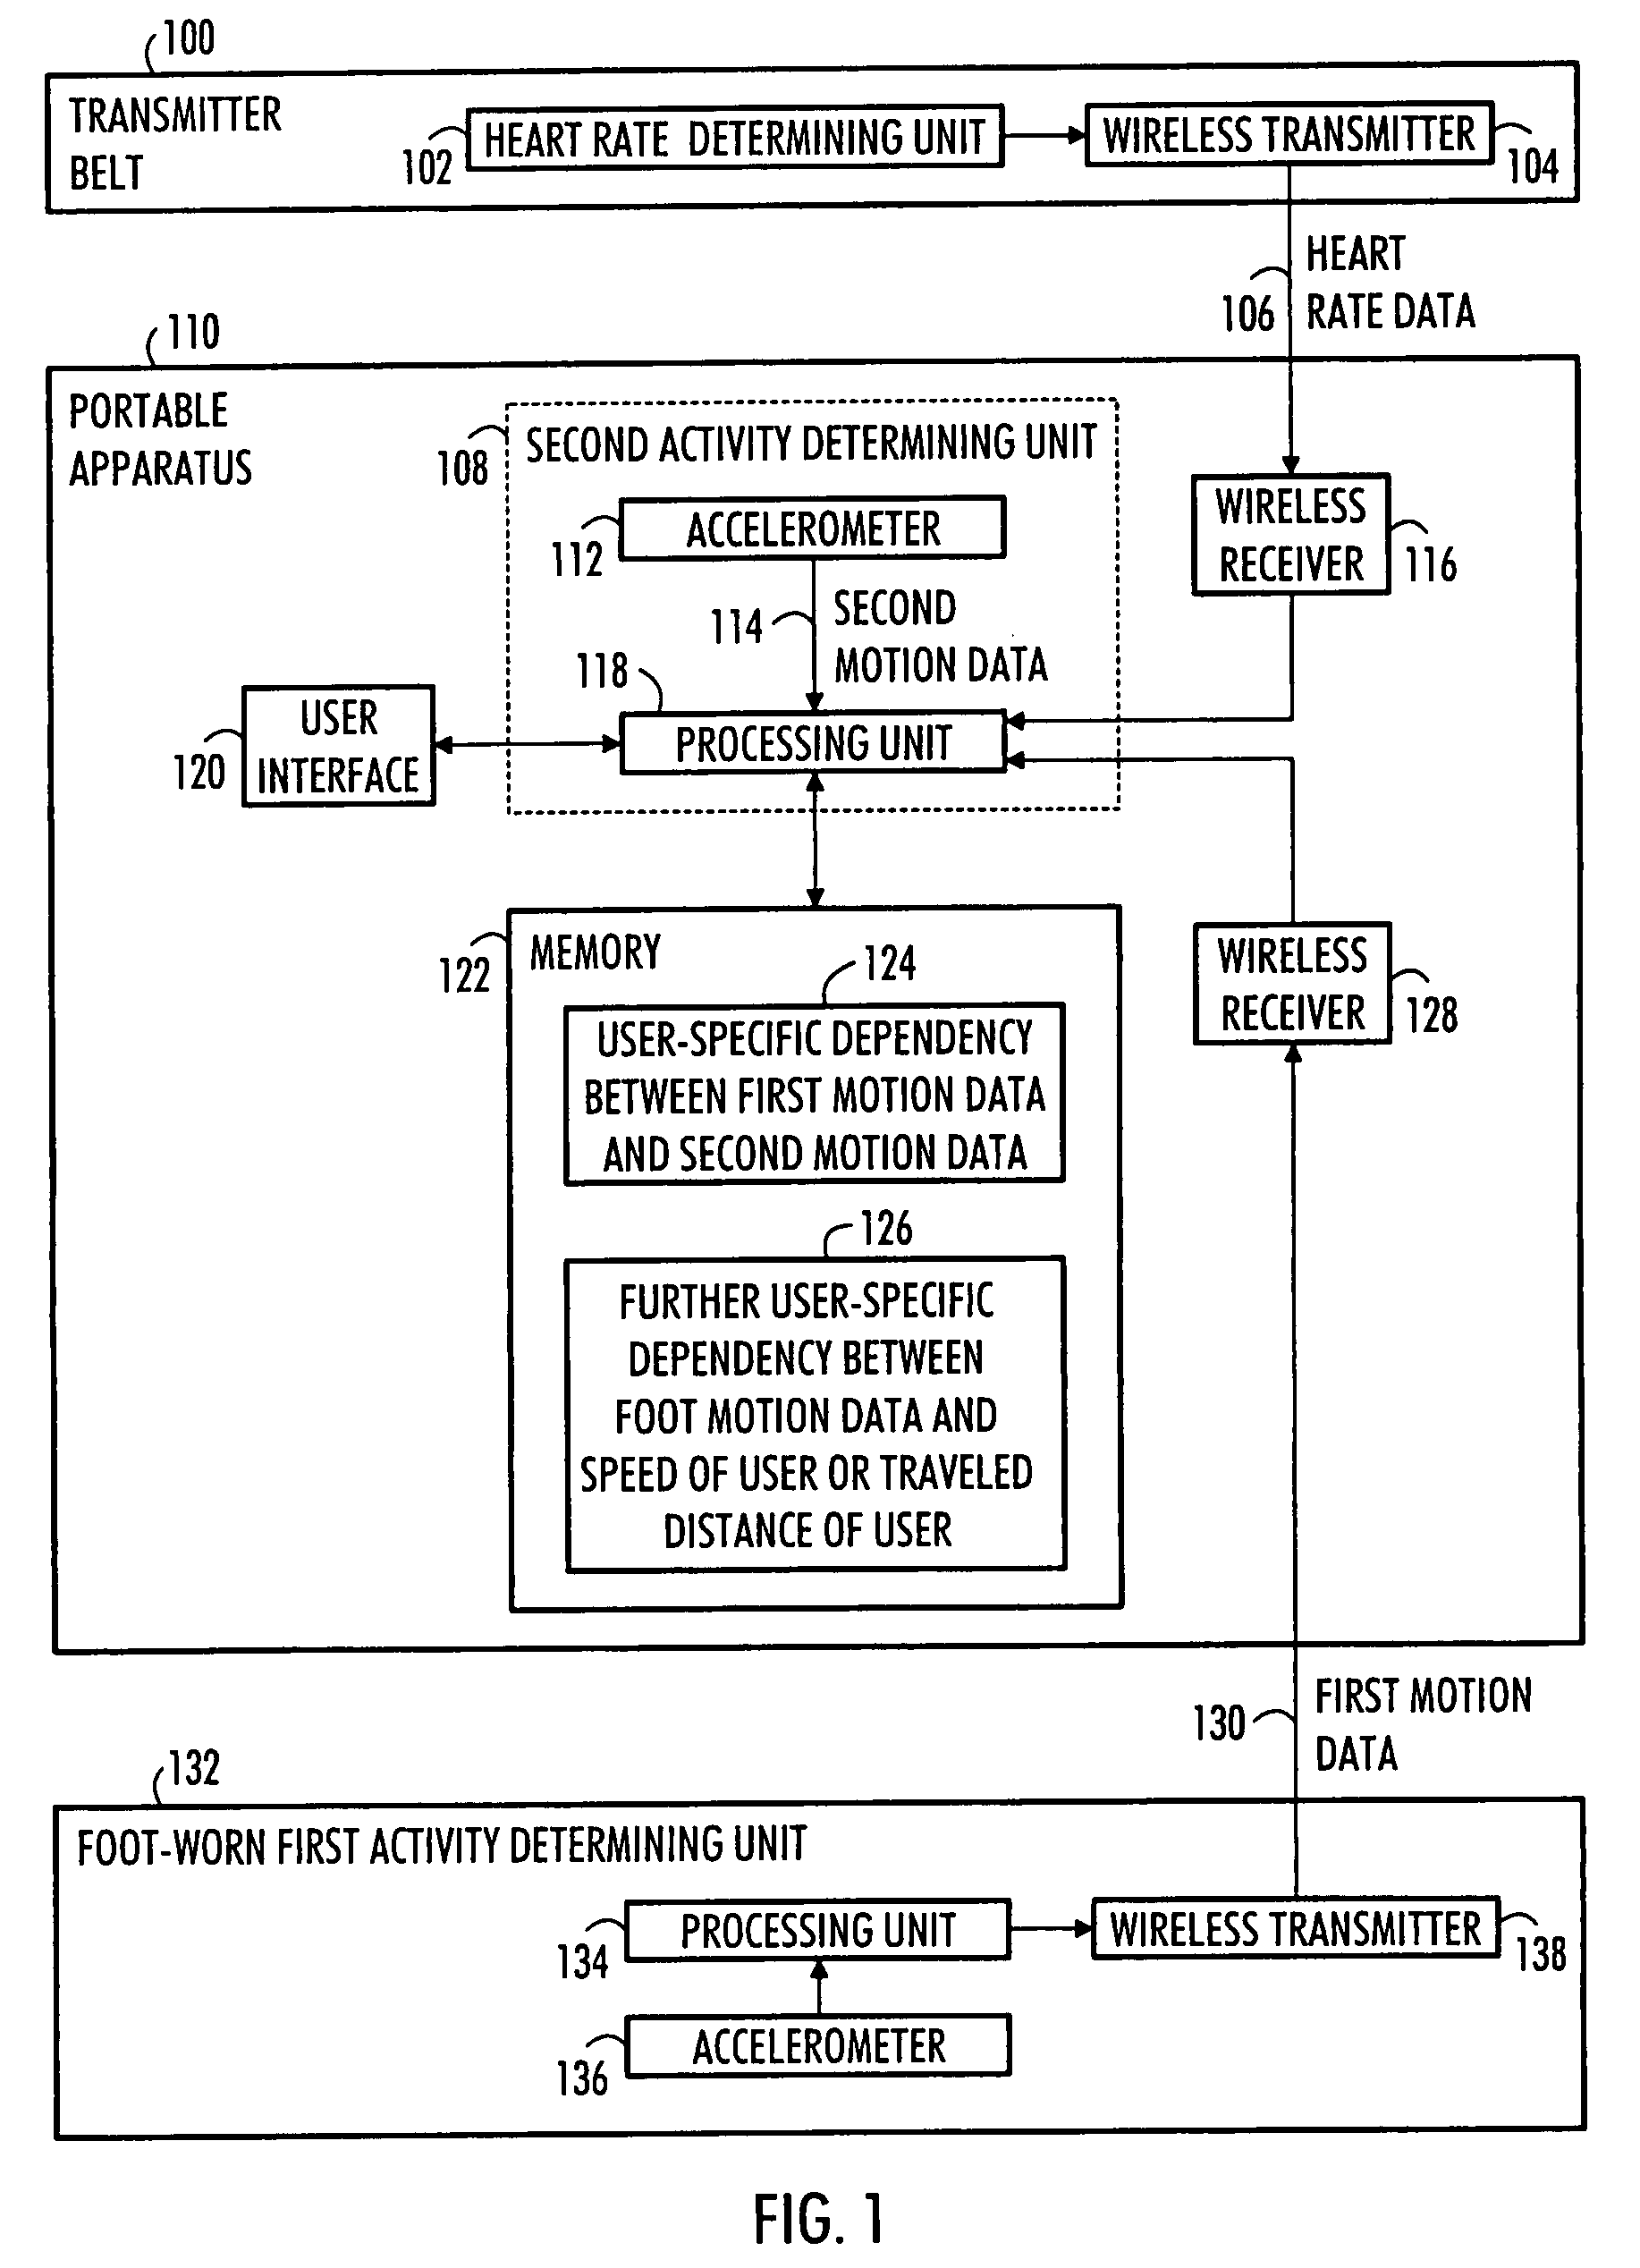 Portable apparatus for monitoring user speed and/or distance traveled